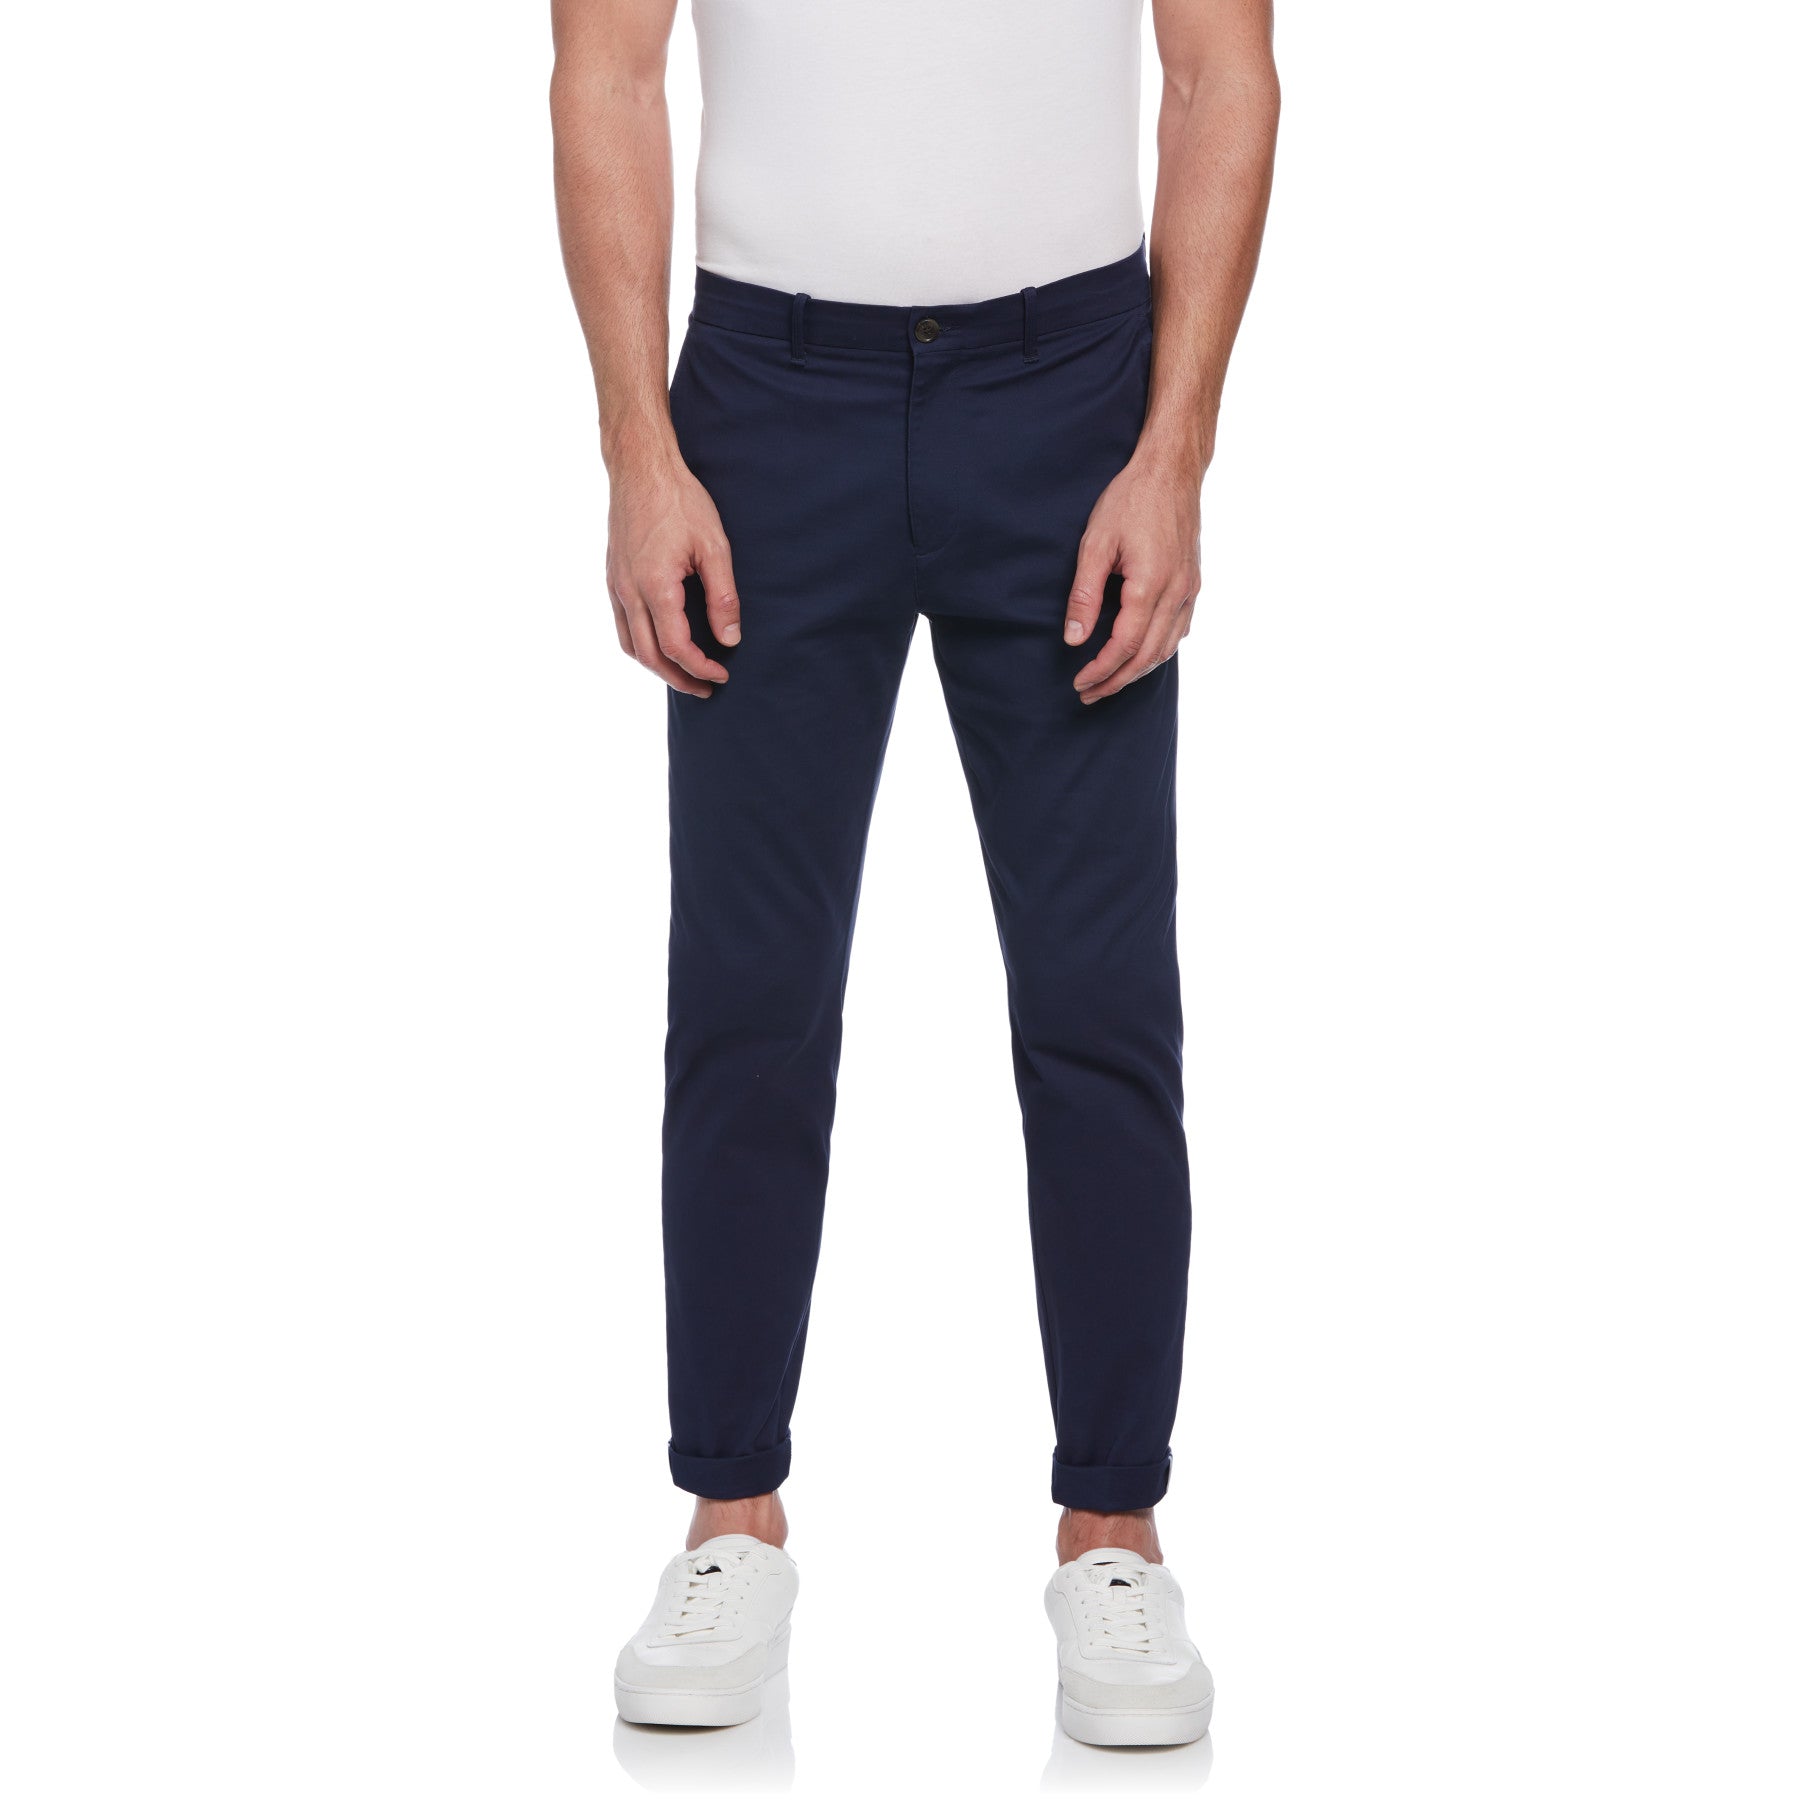 View Bedford Cord Slim Fit Chino Trousers In Dark Sapphire information